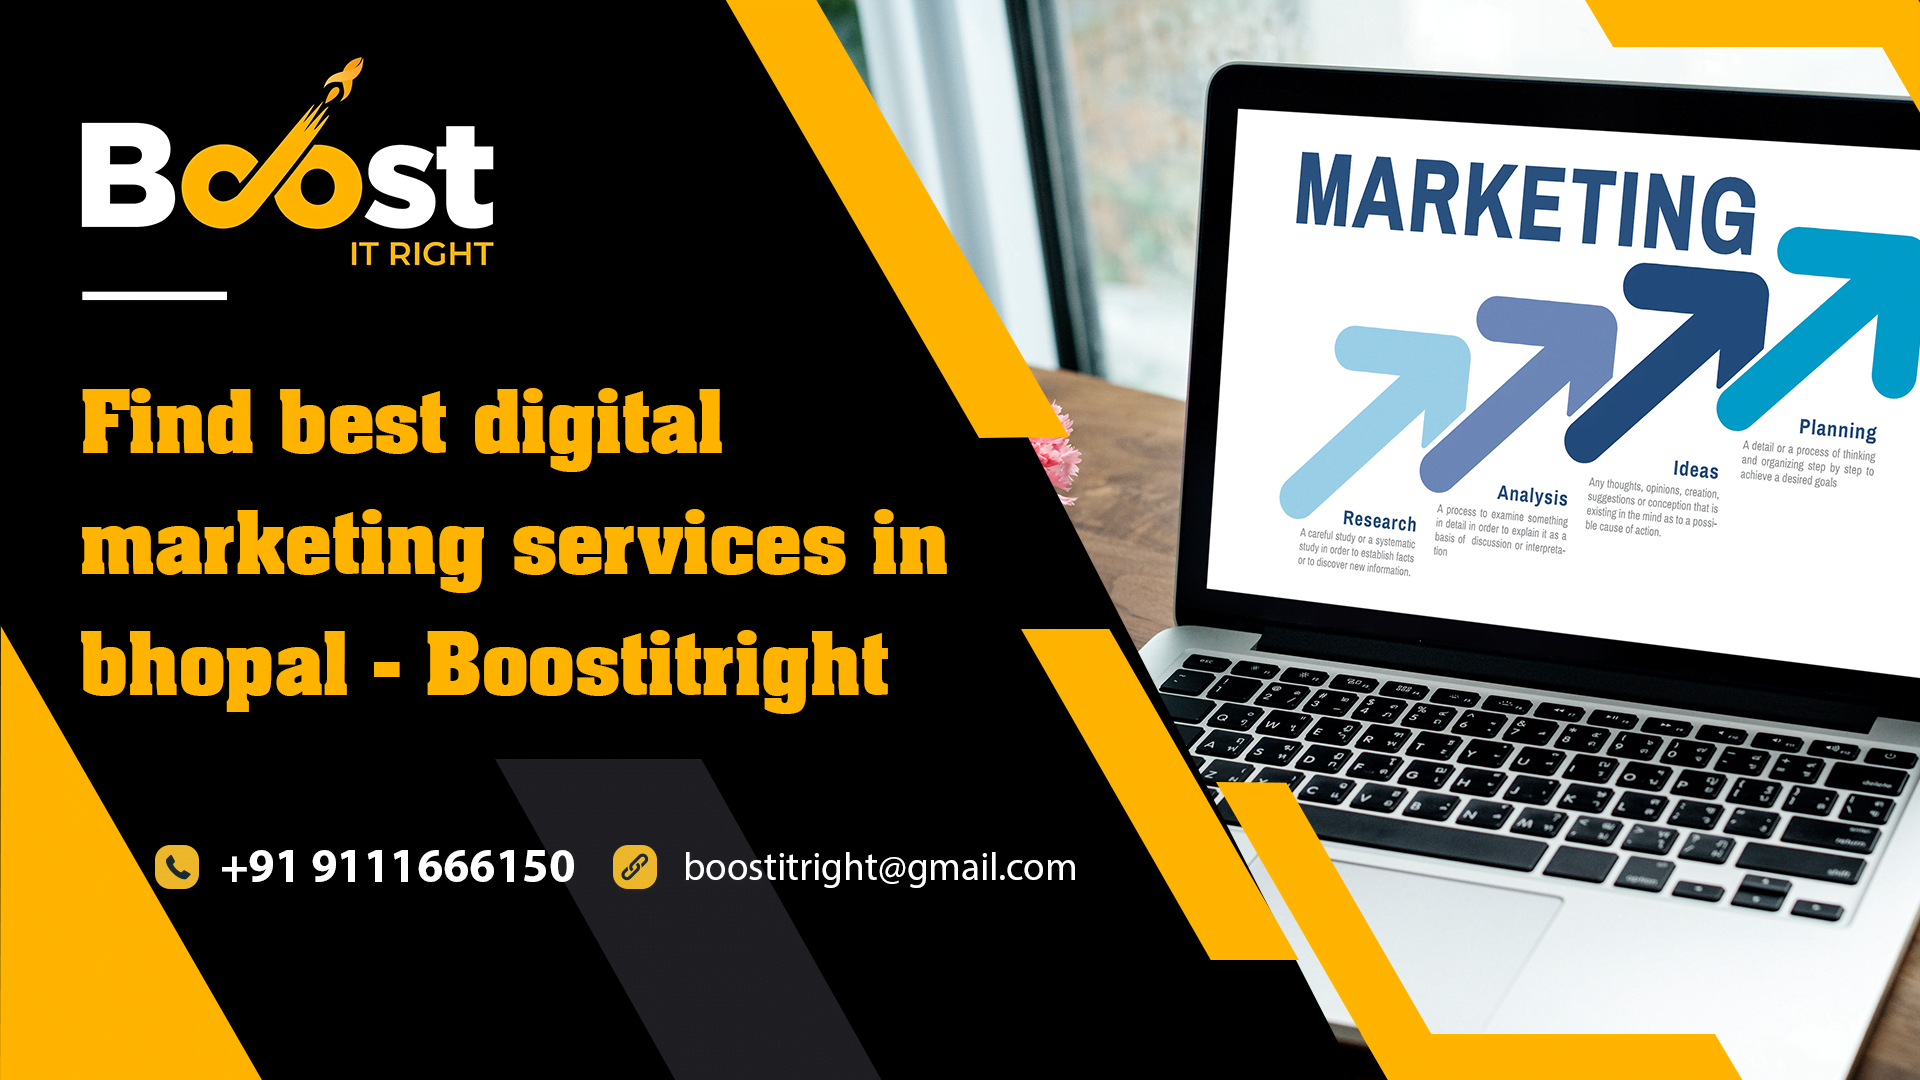 Find best digital marketing services in Bhopal - Boostitright